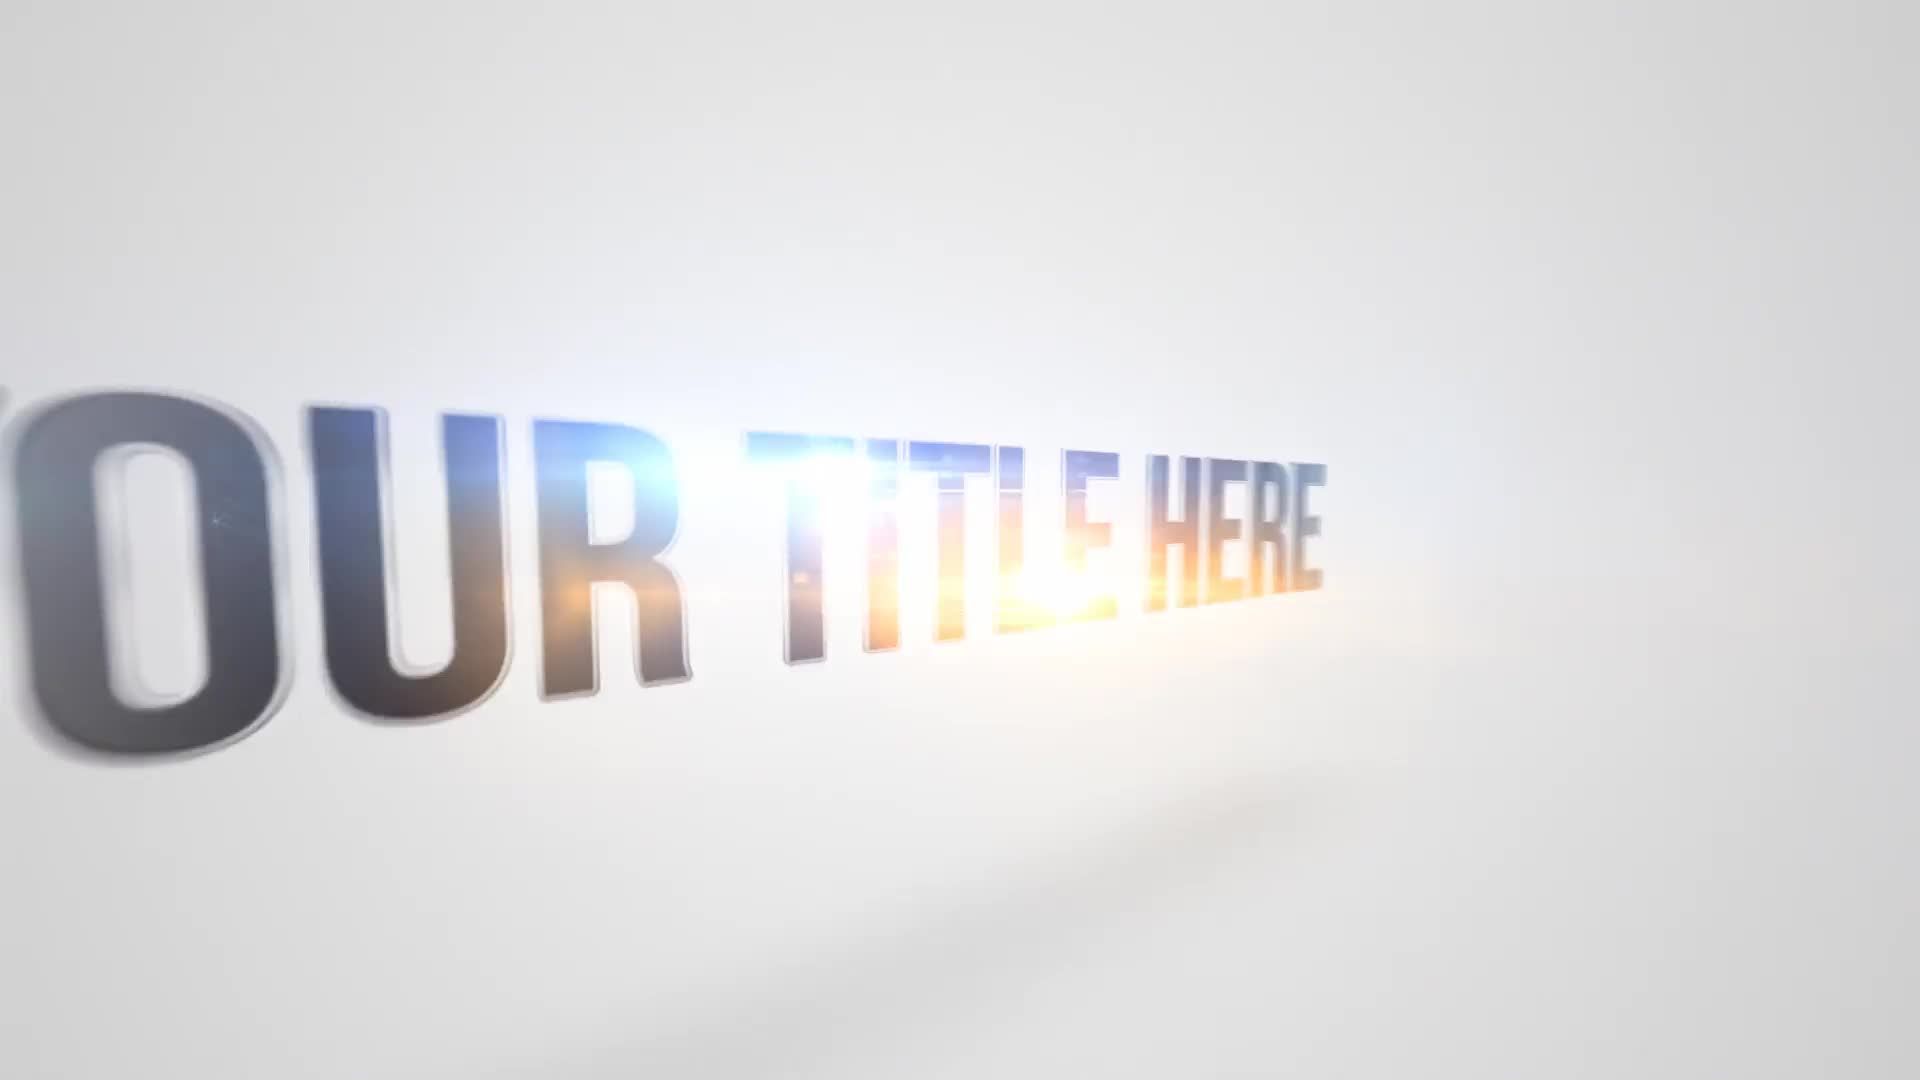 Quick Clean Bling Title 2 - Download Videohive 23164838